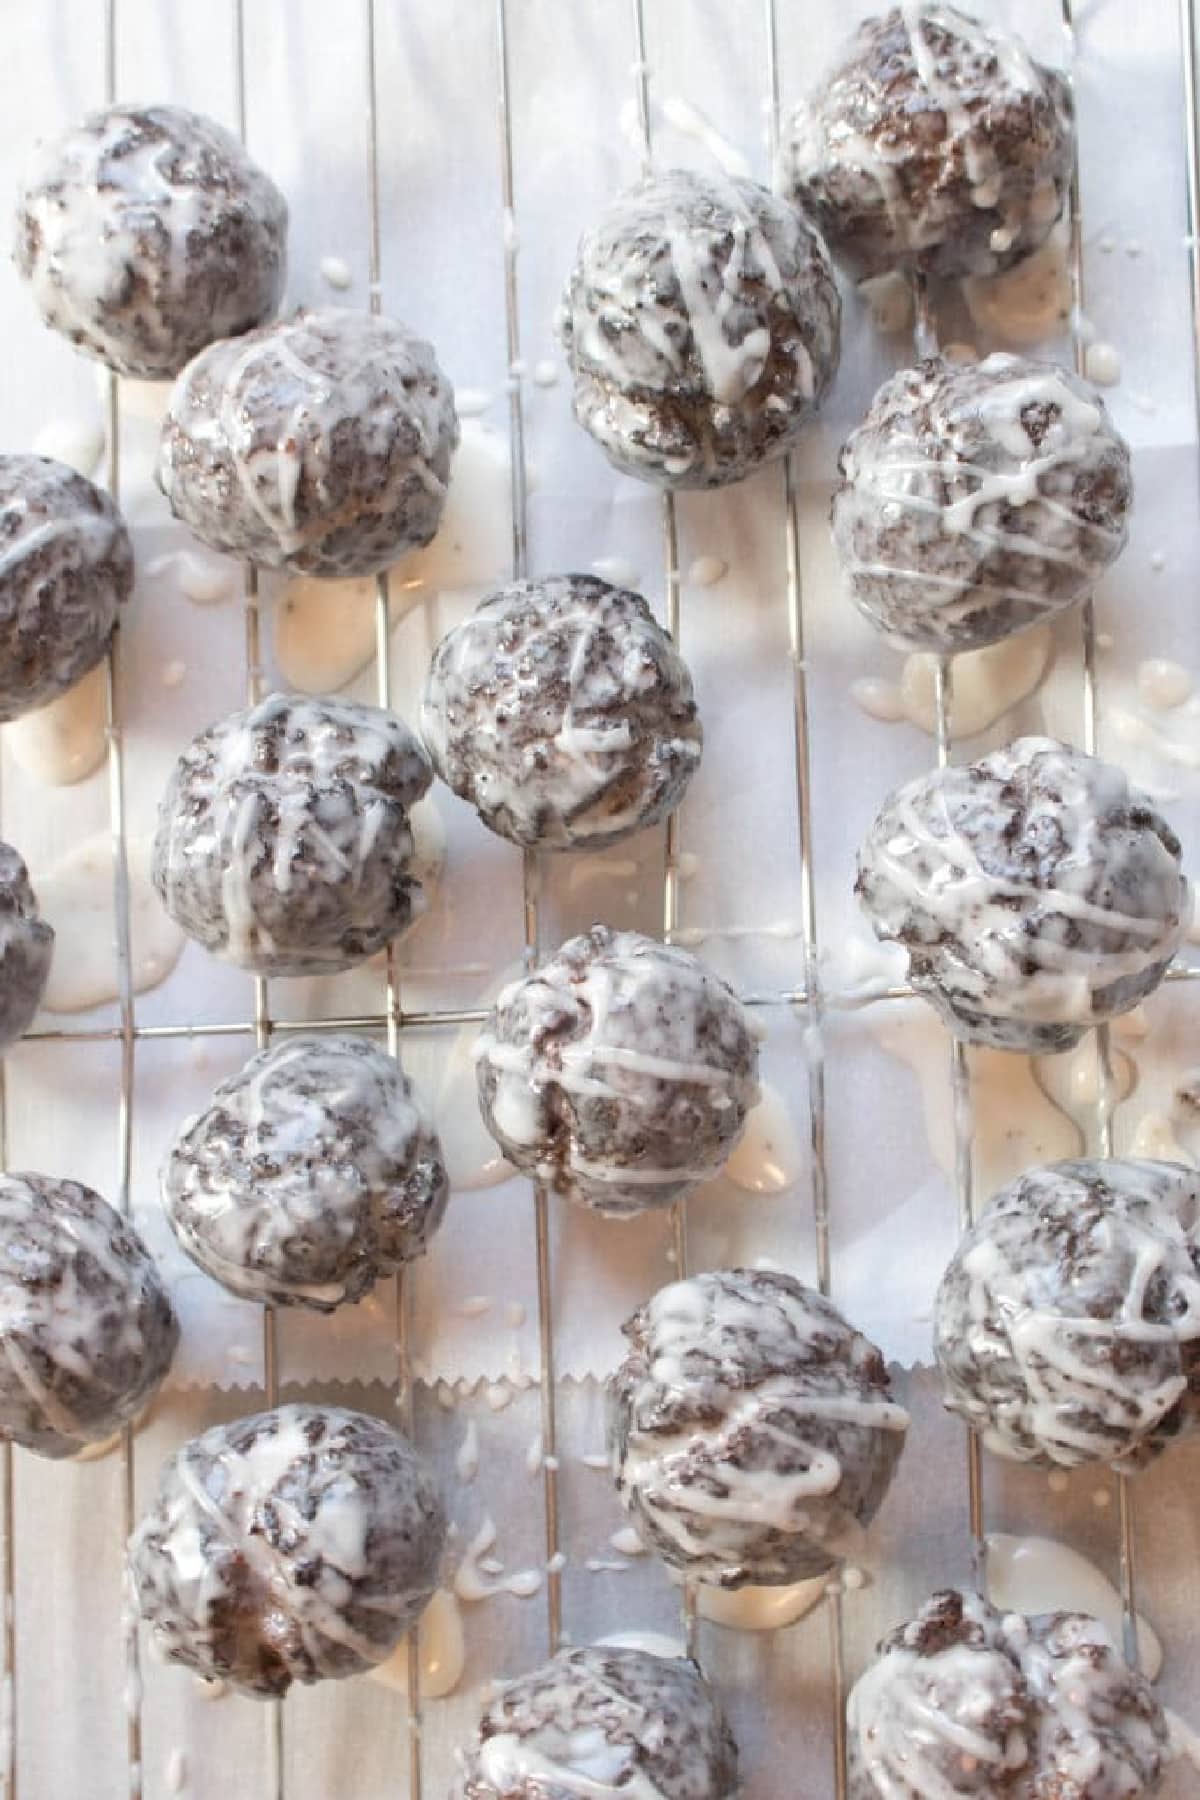 a cooling rack full of glazed chocolate munchkins.